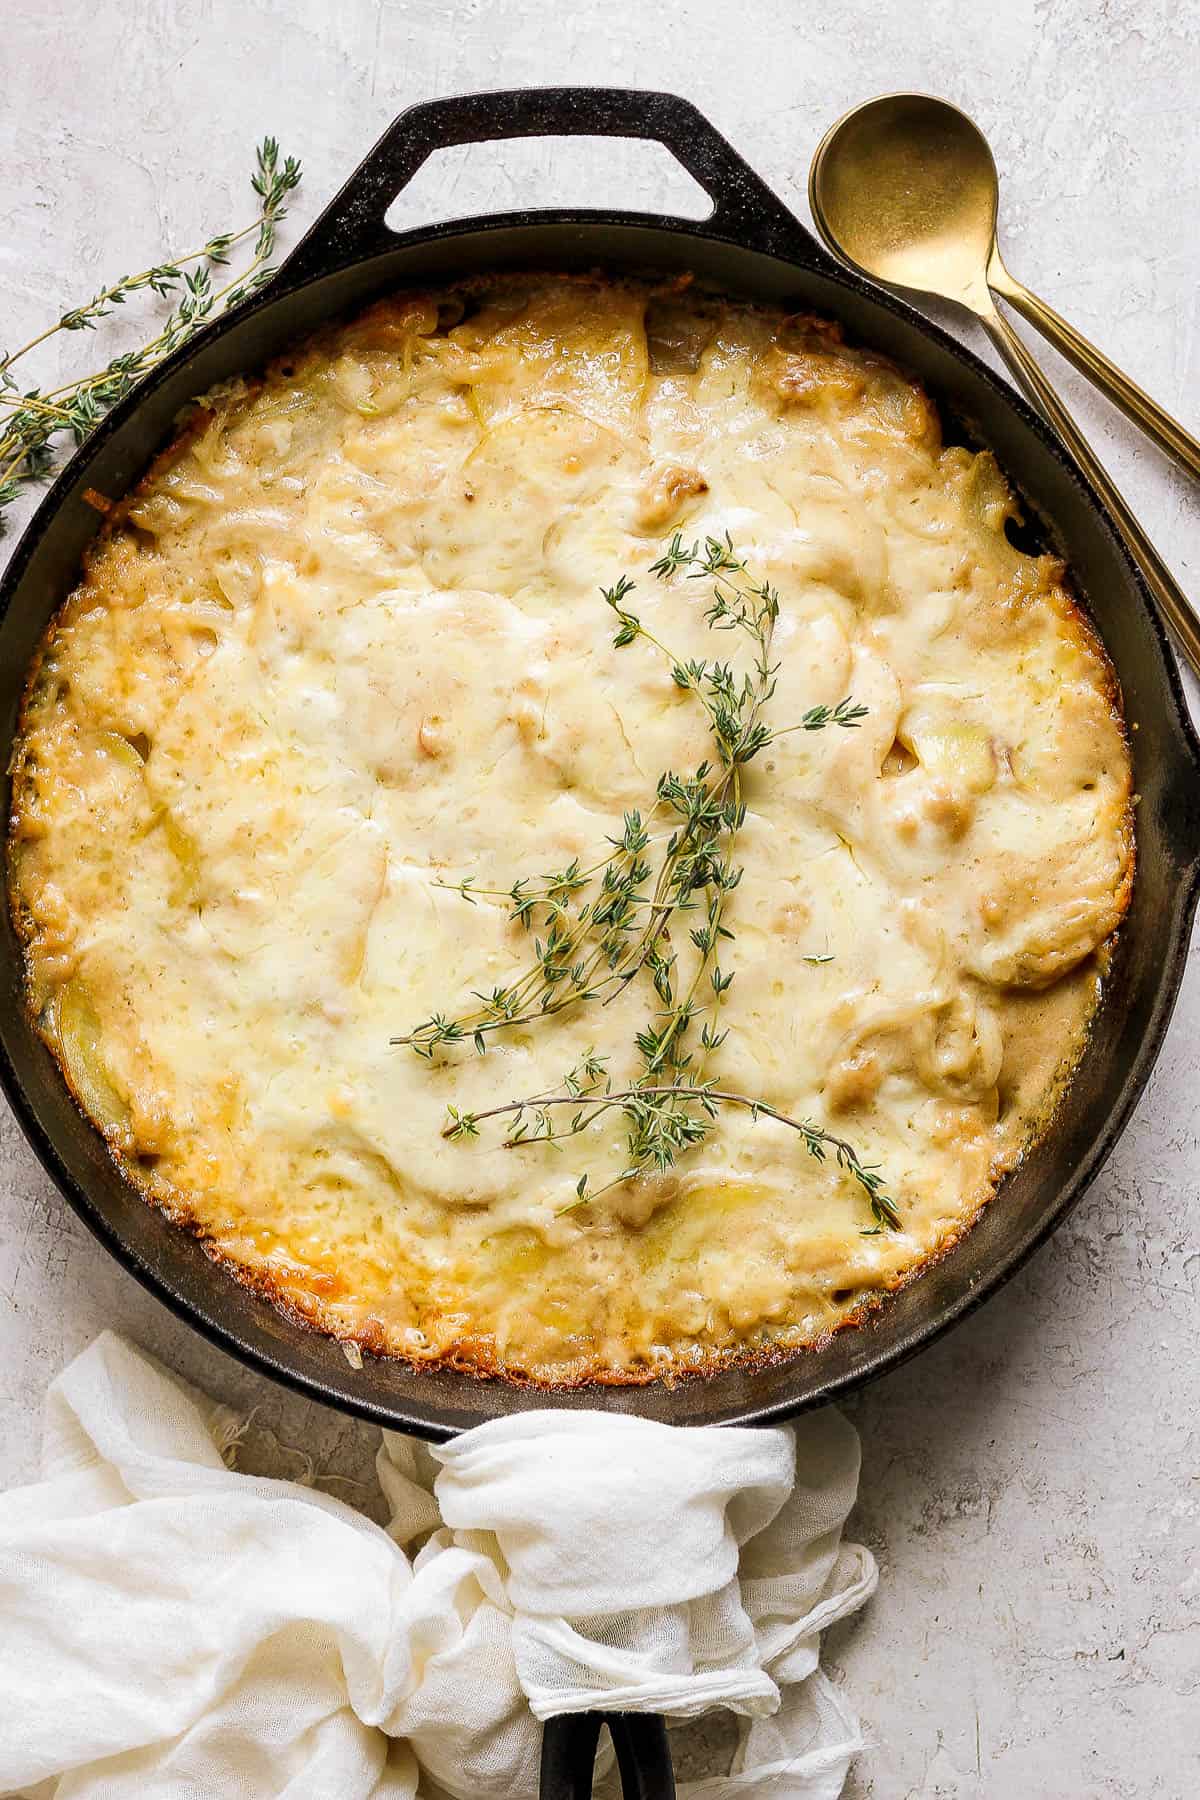 Fully baked potatoes au gratin in a cast iron skillet.